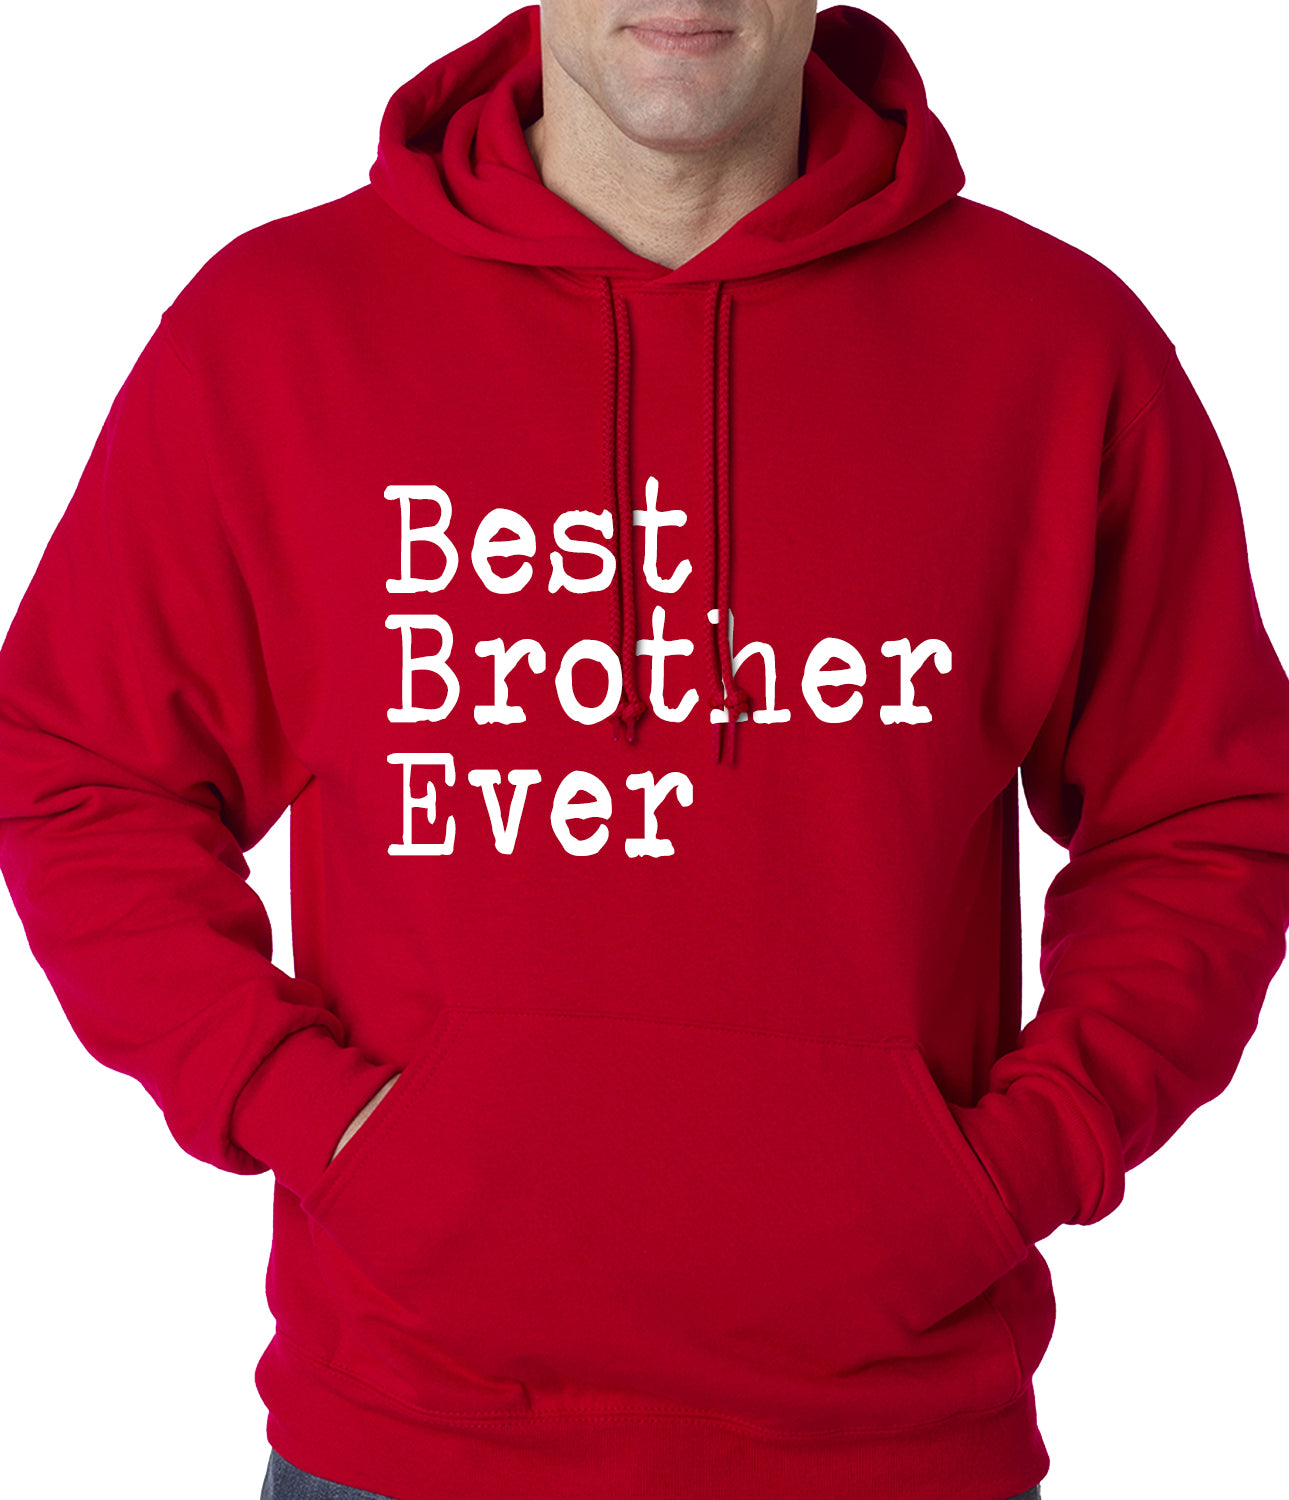 Best Brother Ever Adult Hoodie Red